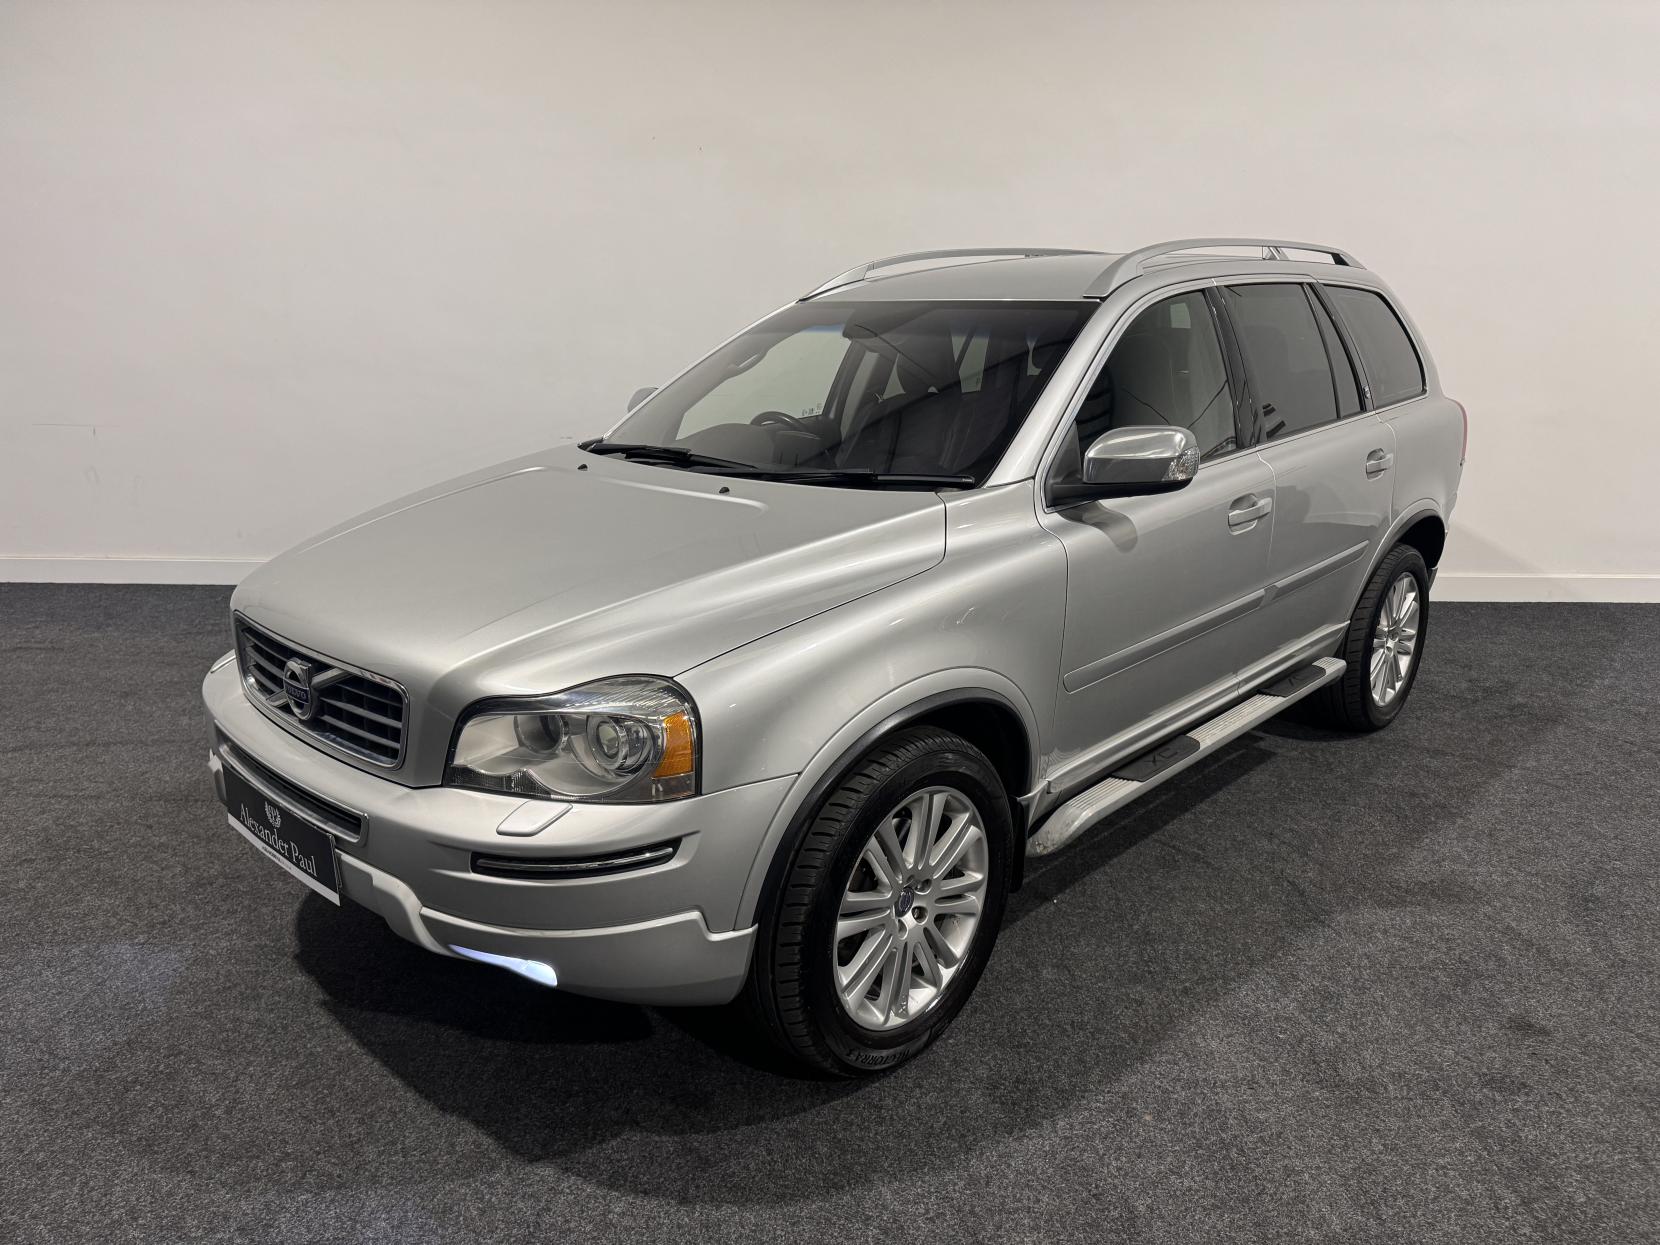 Volvo XC90 2.4 D5 Executive SUV 5dr Diesel Geartronic 4WD Euro 5 (200 ps)